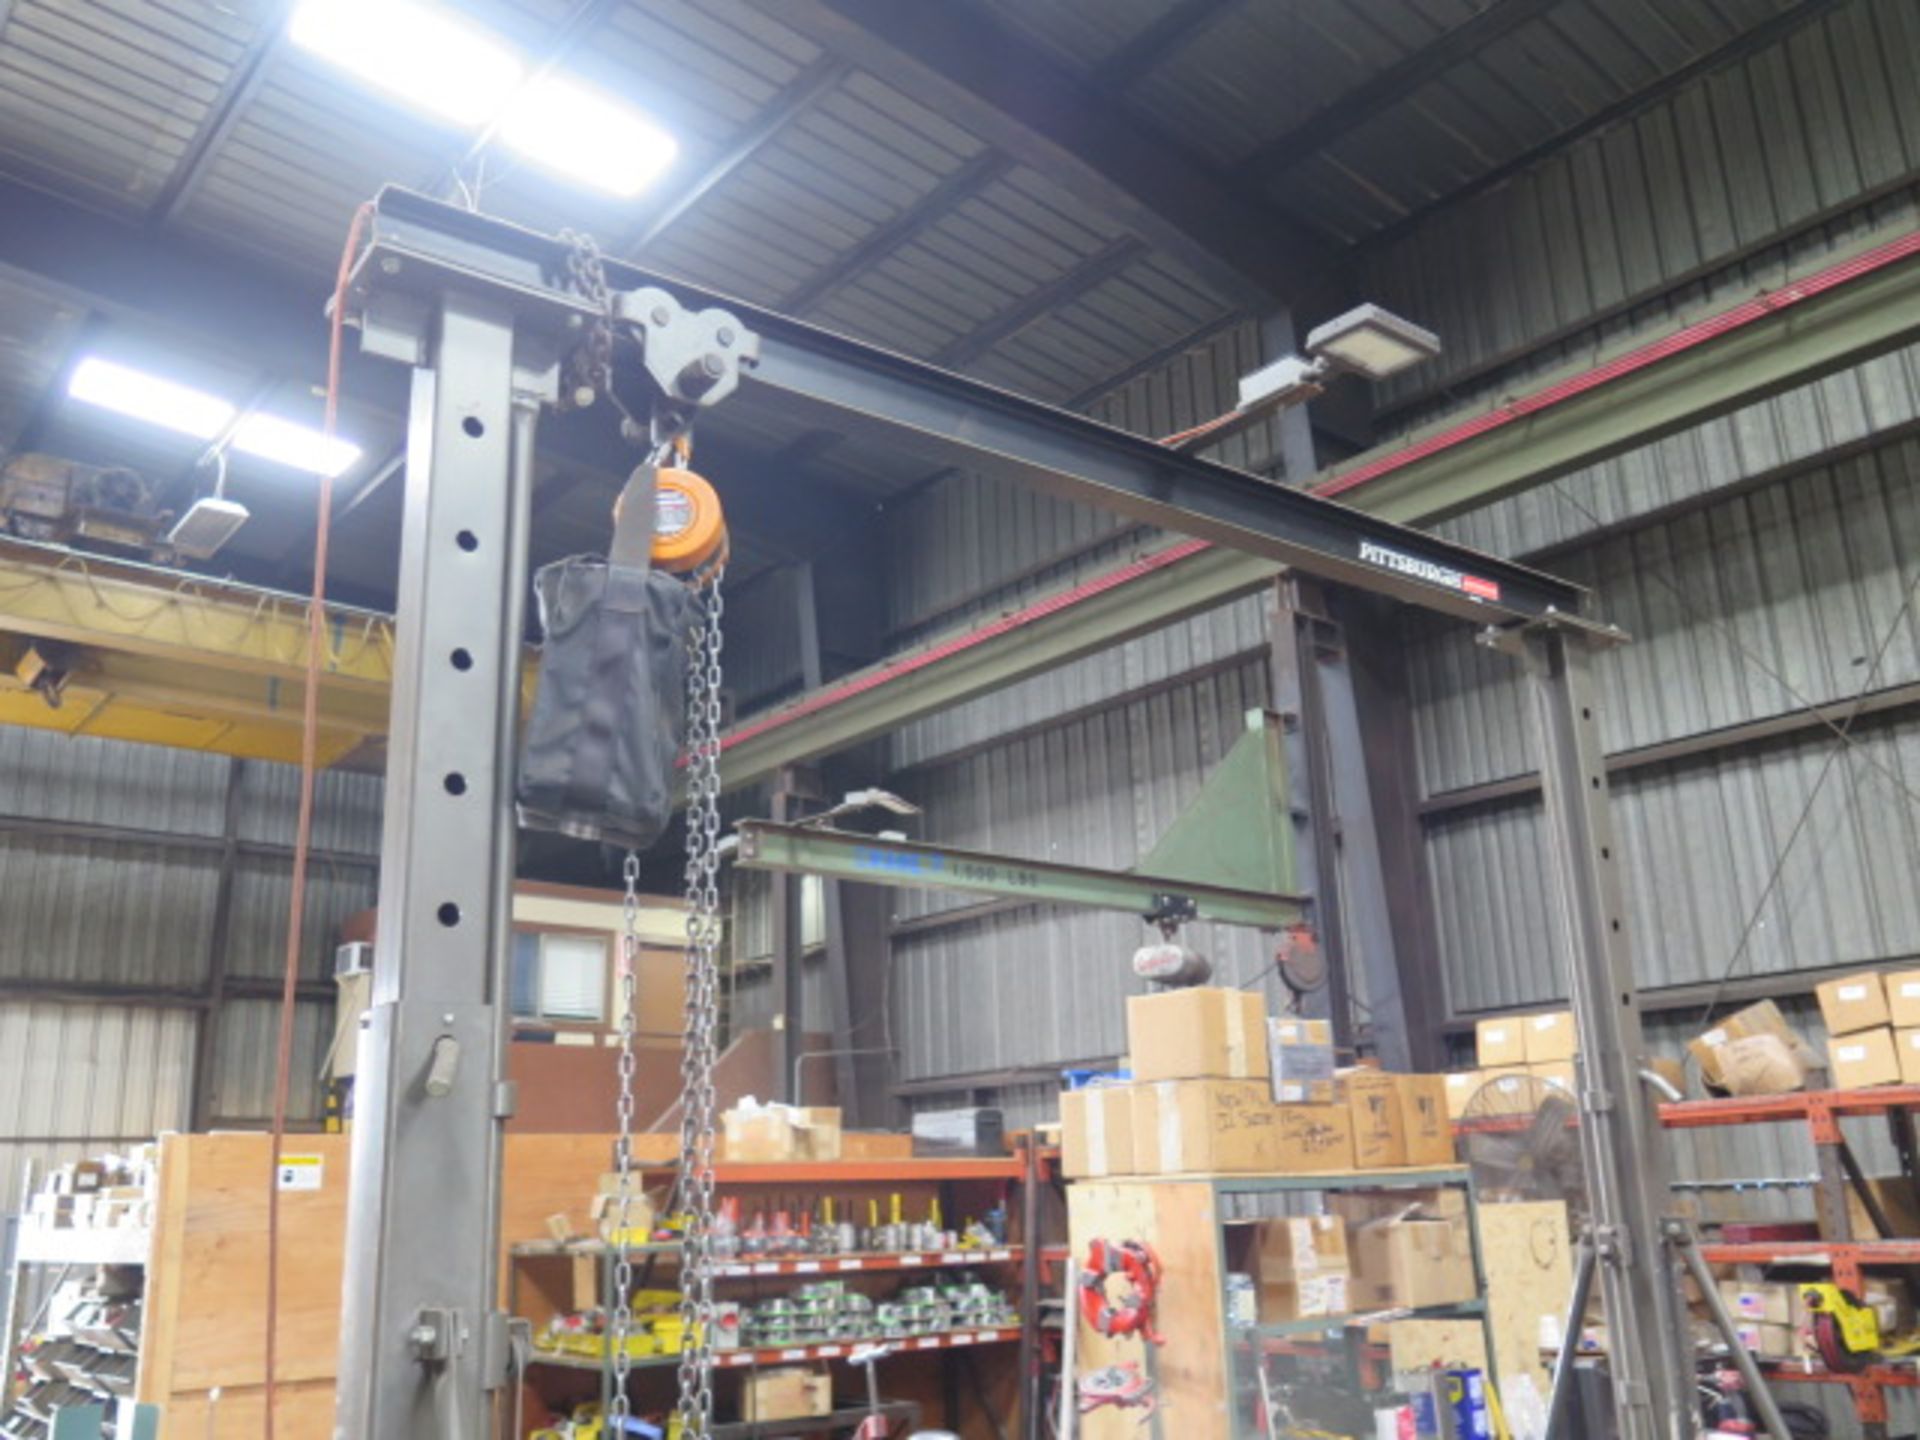 Pittsburgh 1 Ton Portable A-Frame Gantry w/ Chain Hoist (SOLD AS-IS - NO WARRANTY) - Image 2 of 7